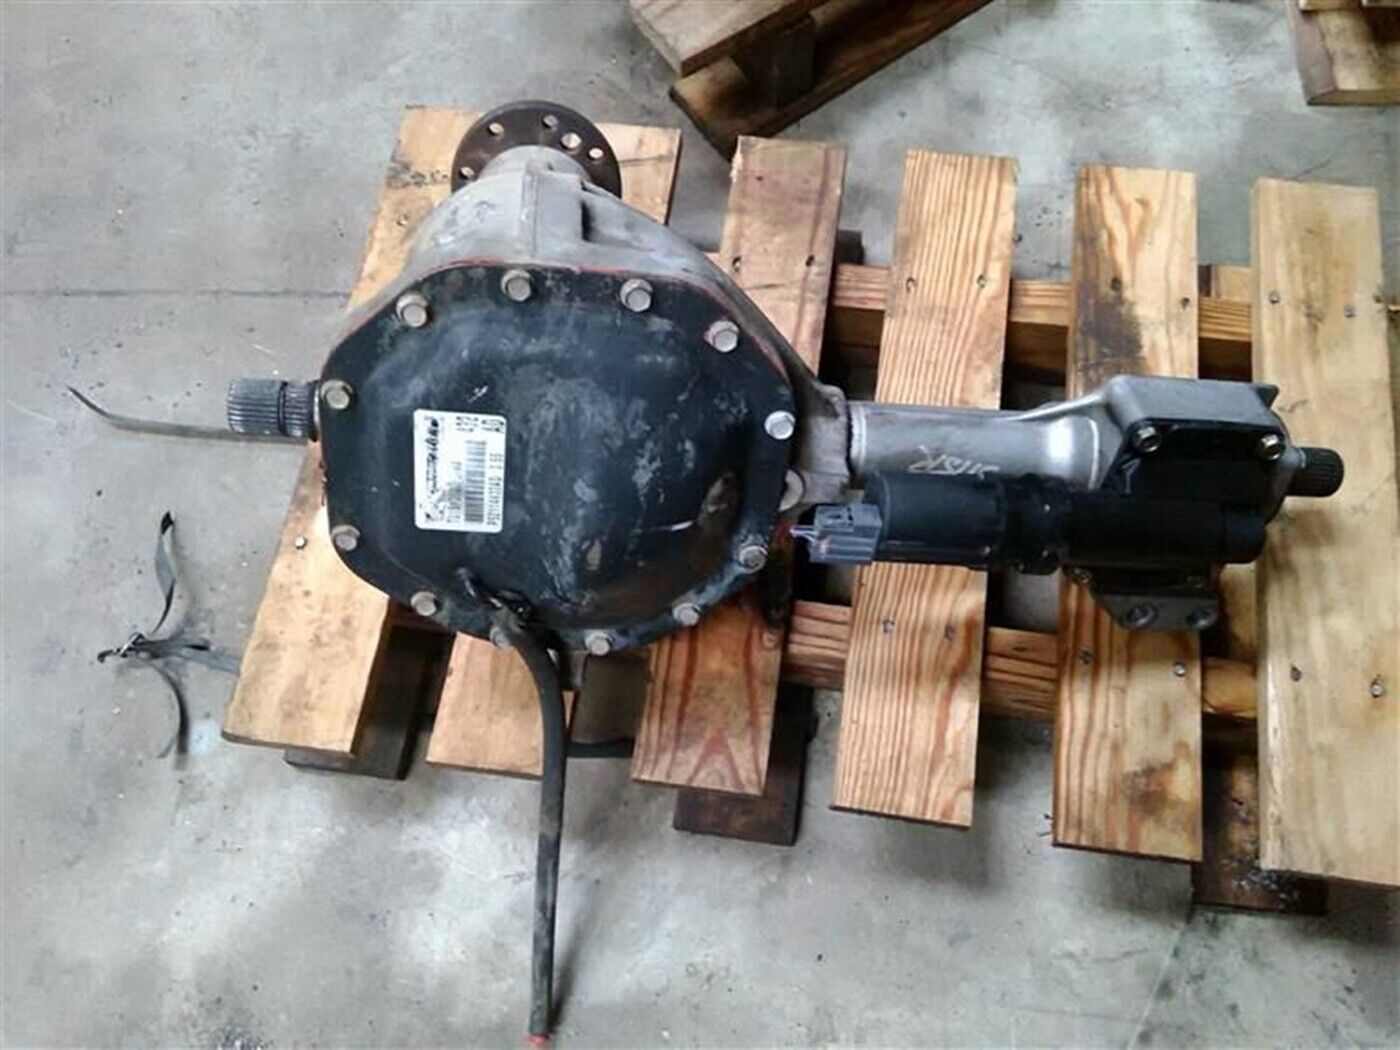 Used 2006-2011 Dodge Ram 1500 Front Axle Differential Carrier 3.55 2011 Dodge Ram 1500 Gear Ratio